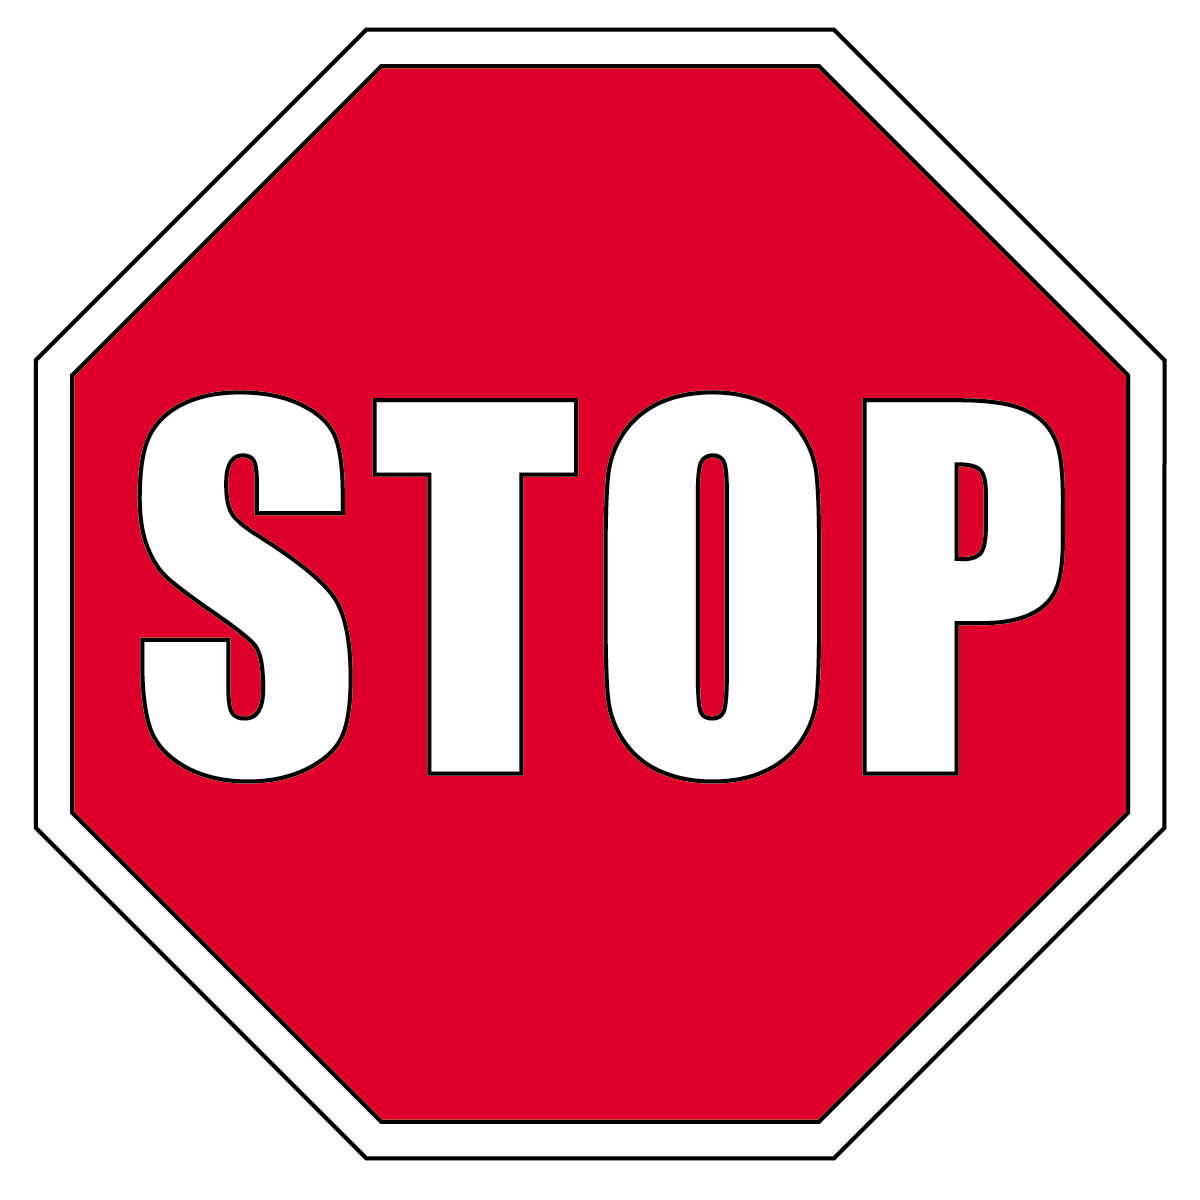 Free Printable Stop Sign, Download Free Printable Stop Sign png images